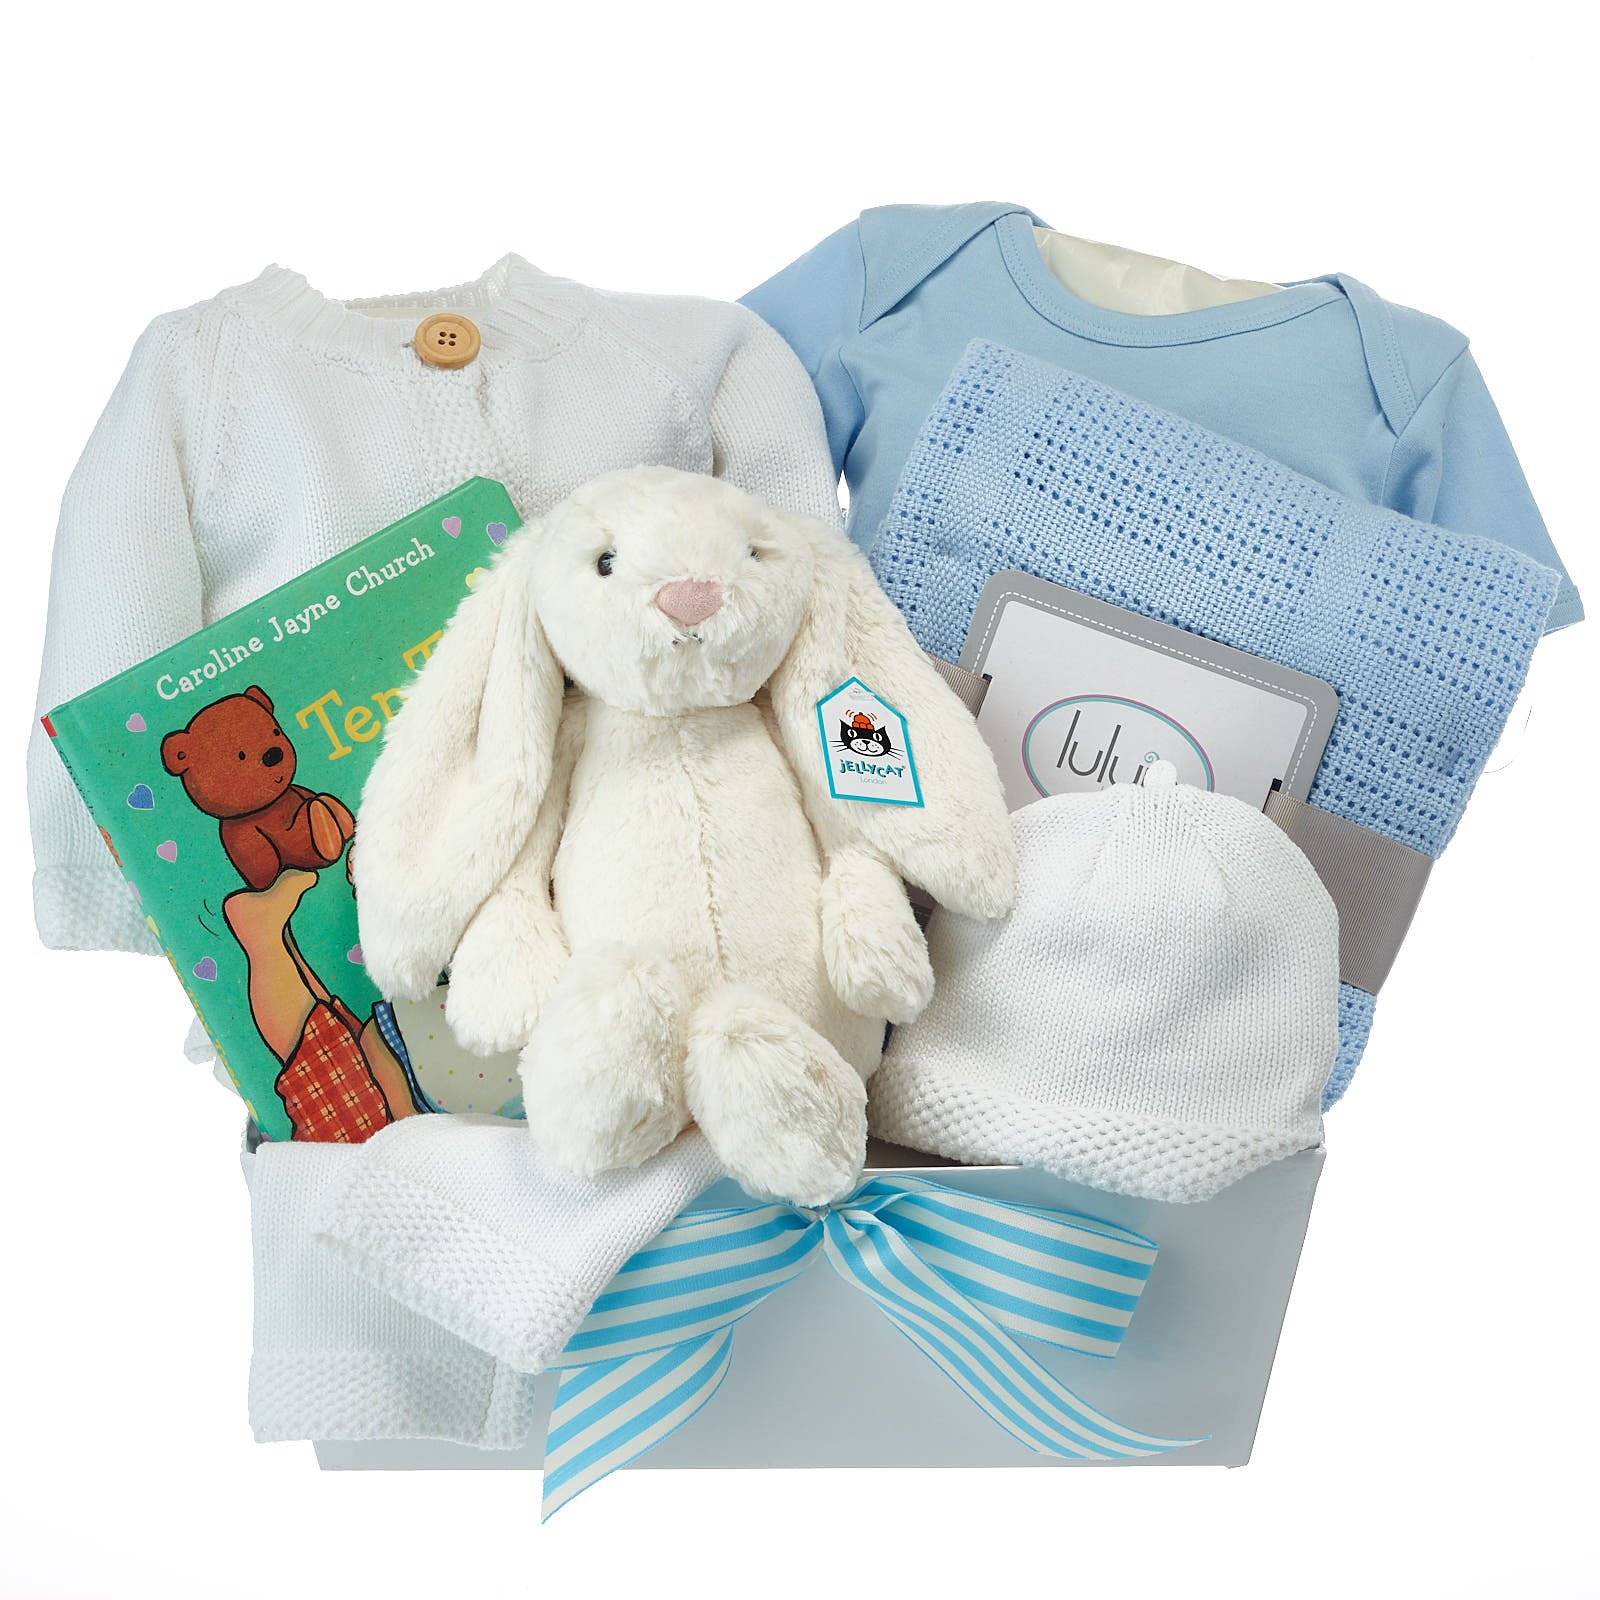 Premium Quality Gifts For New Baby Boy